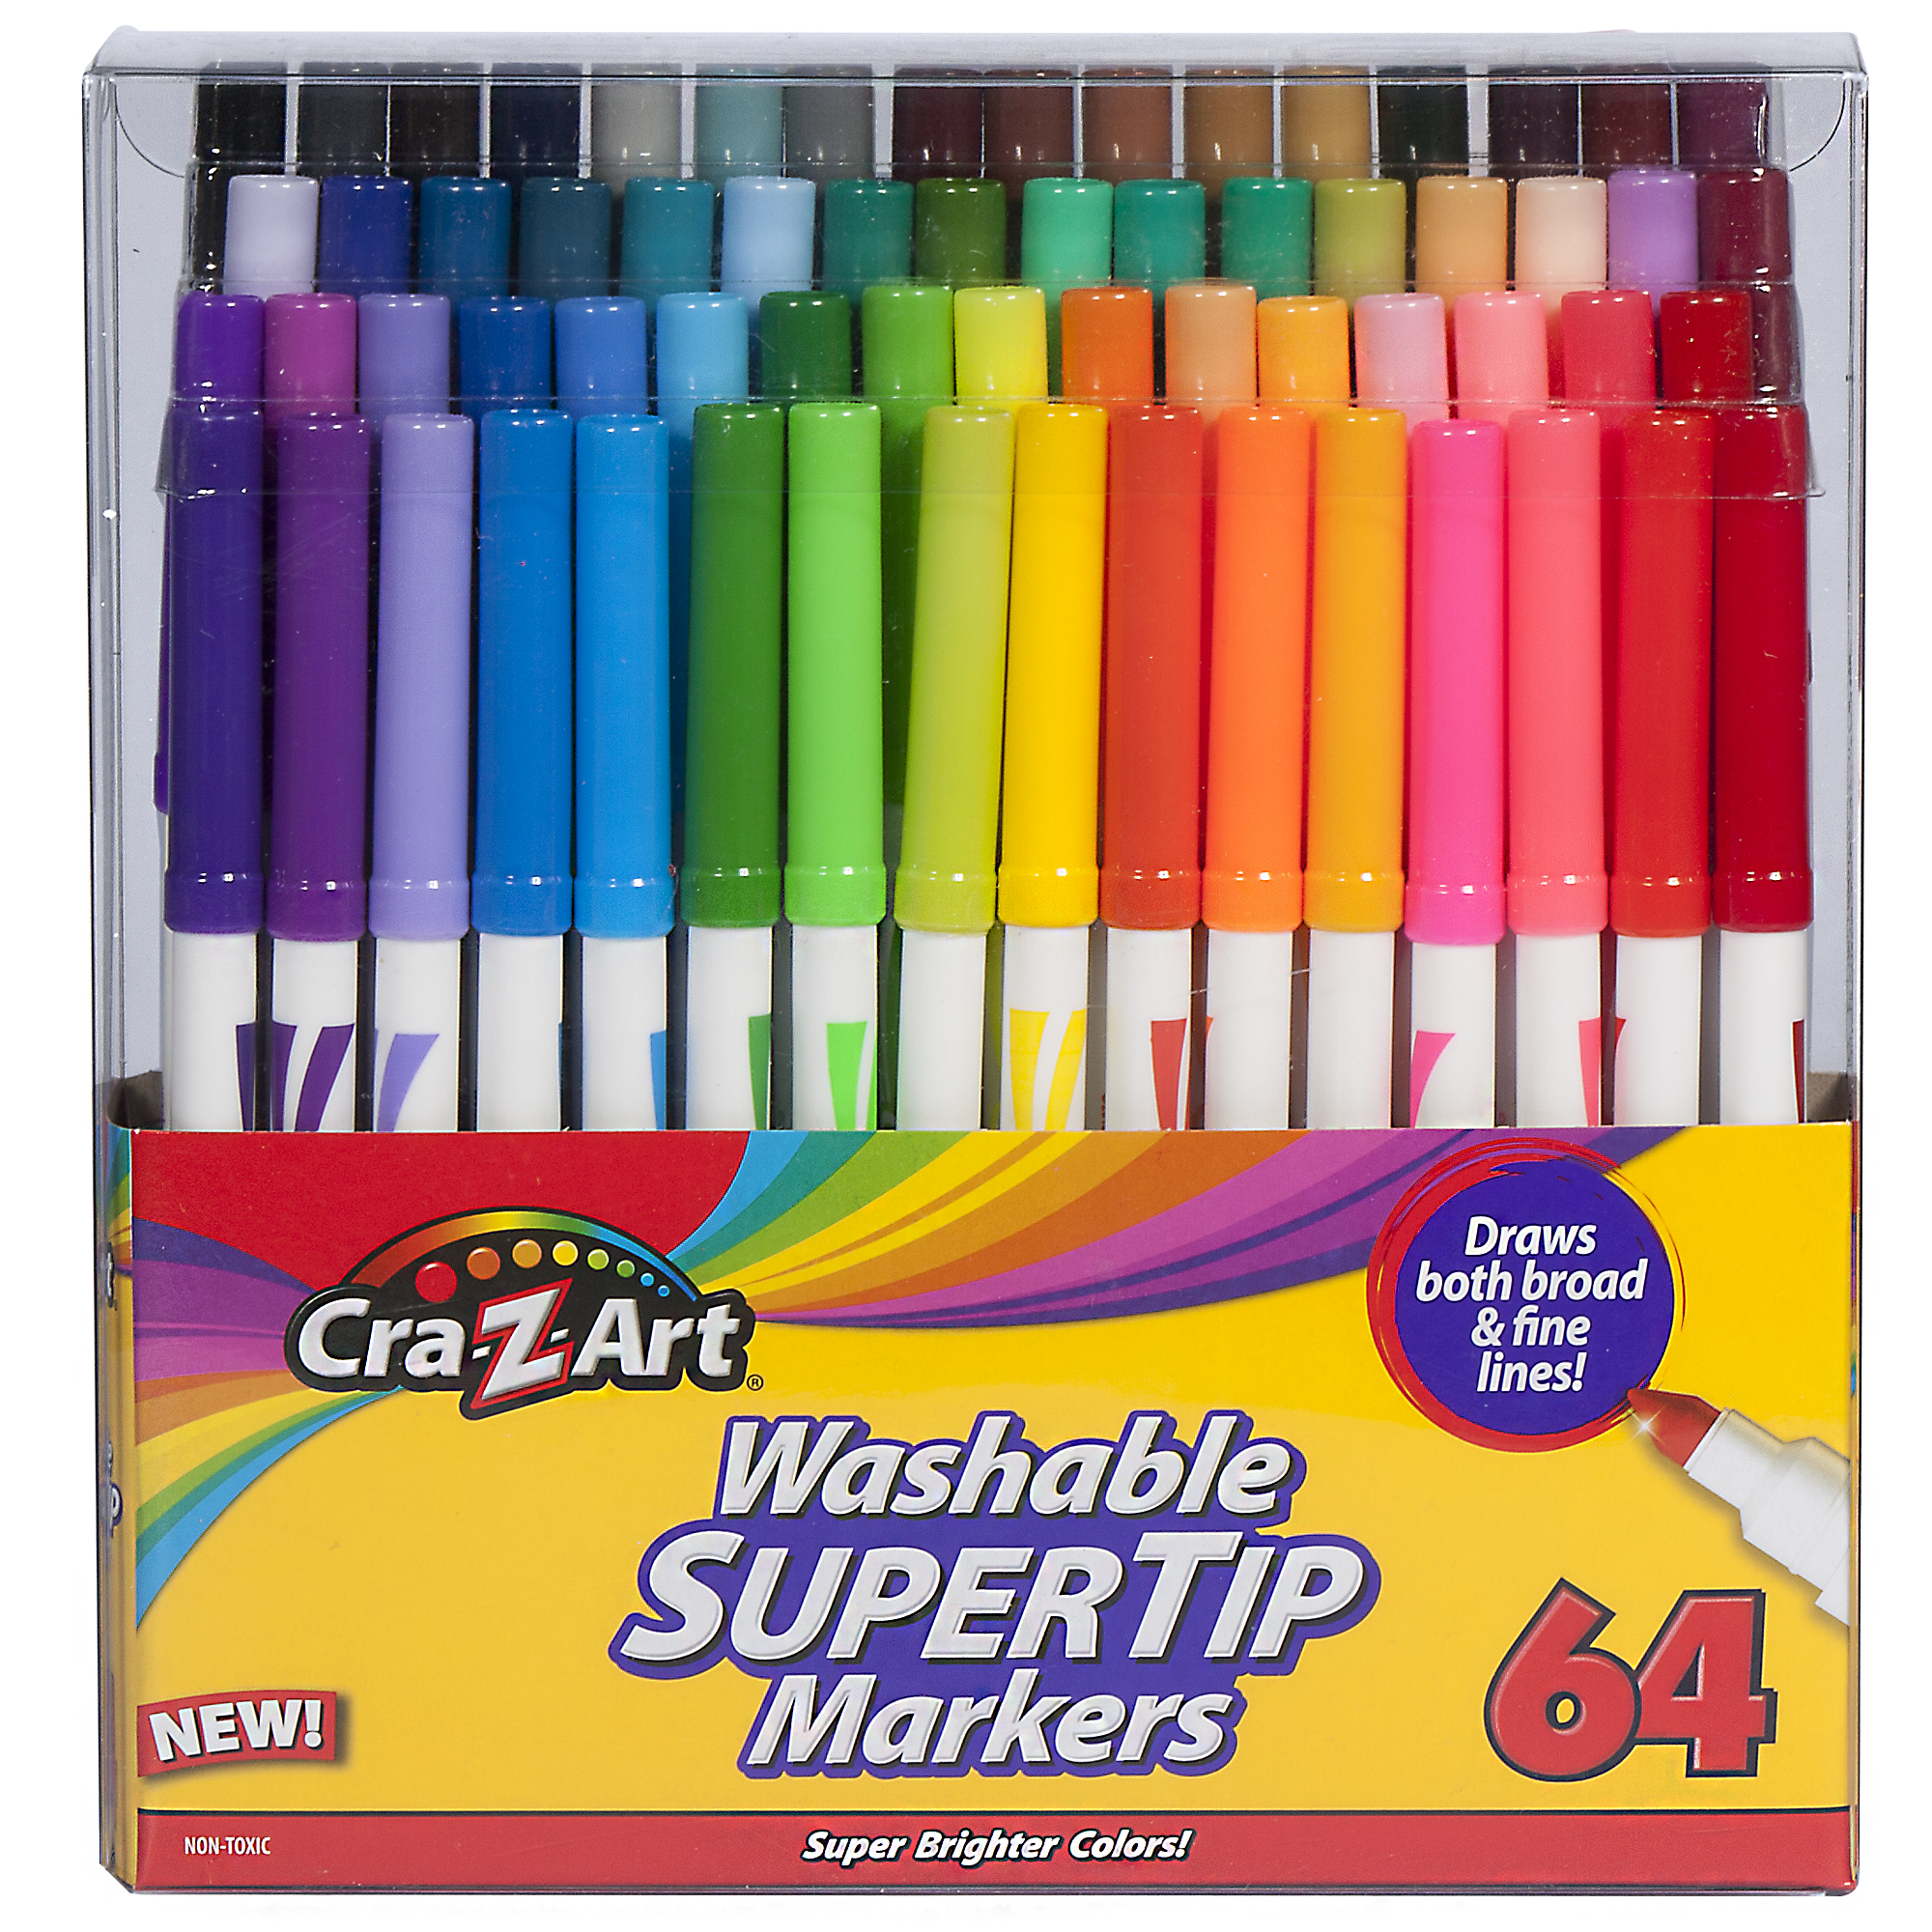 Cra-Z-Art Washable Super Tip Markers, 64 Count - image 1 of 10